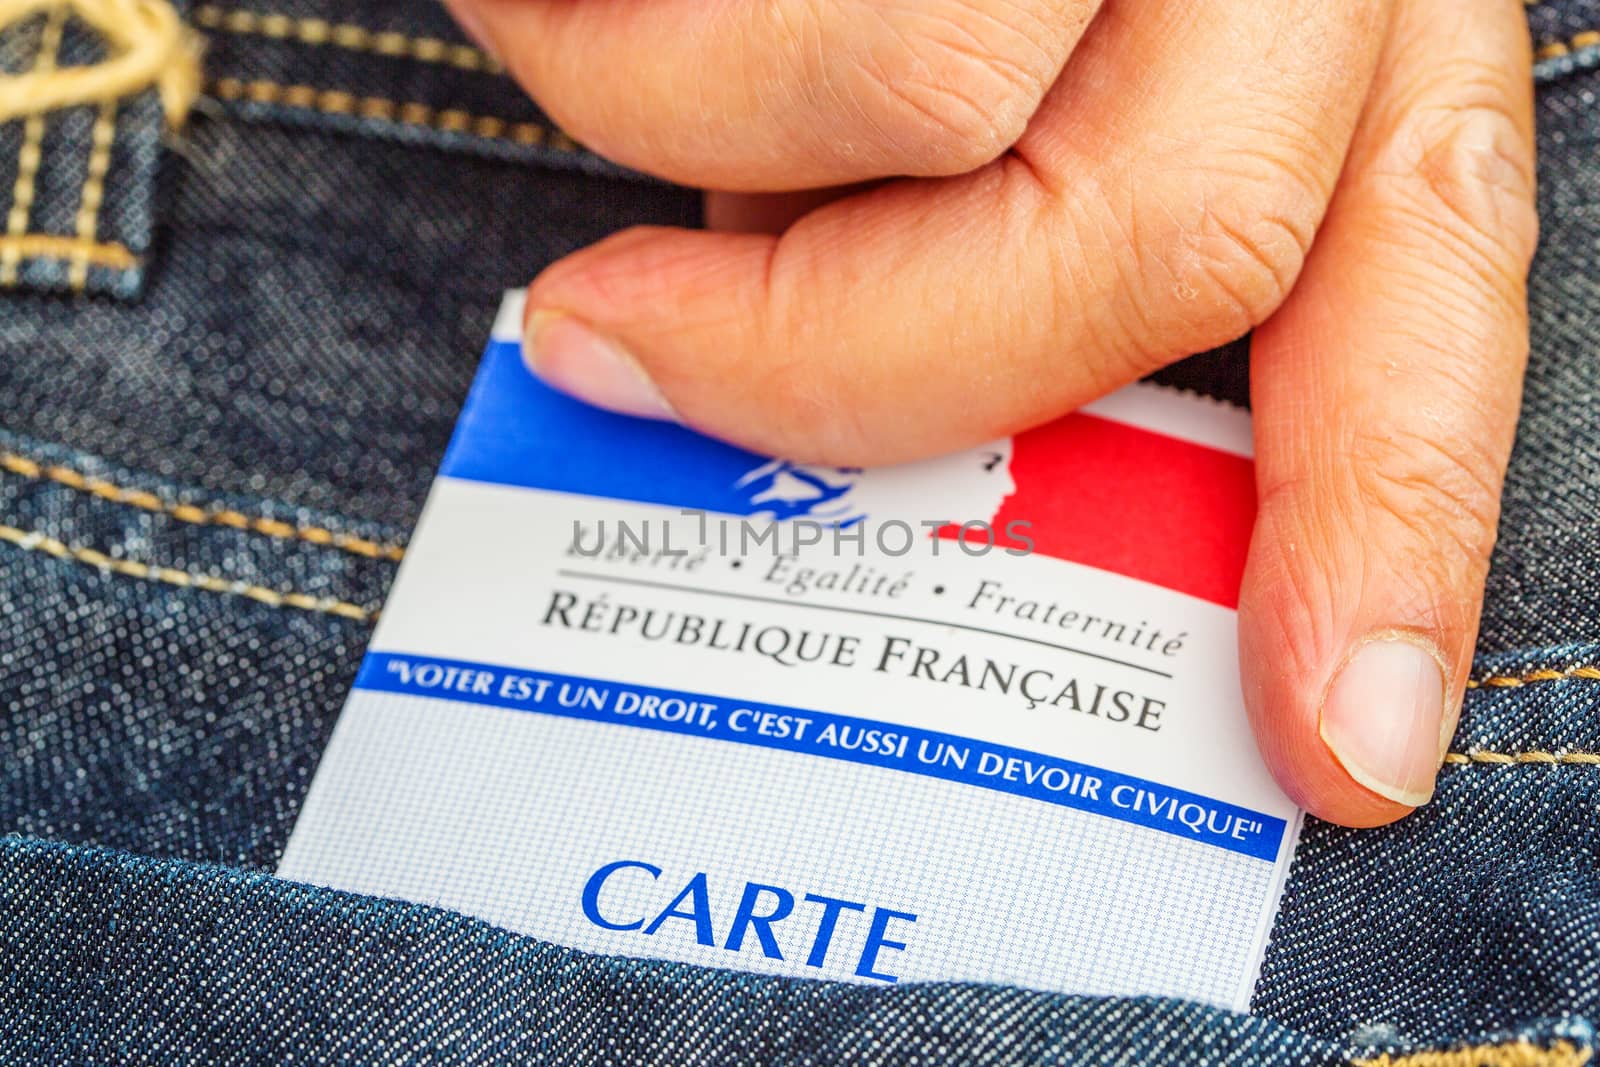 French electoral card out of the pocket of a jeans, 2017 presidential and legislative elections concept by pixinoo